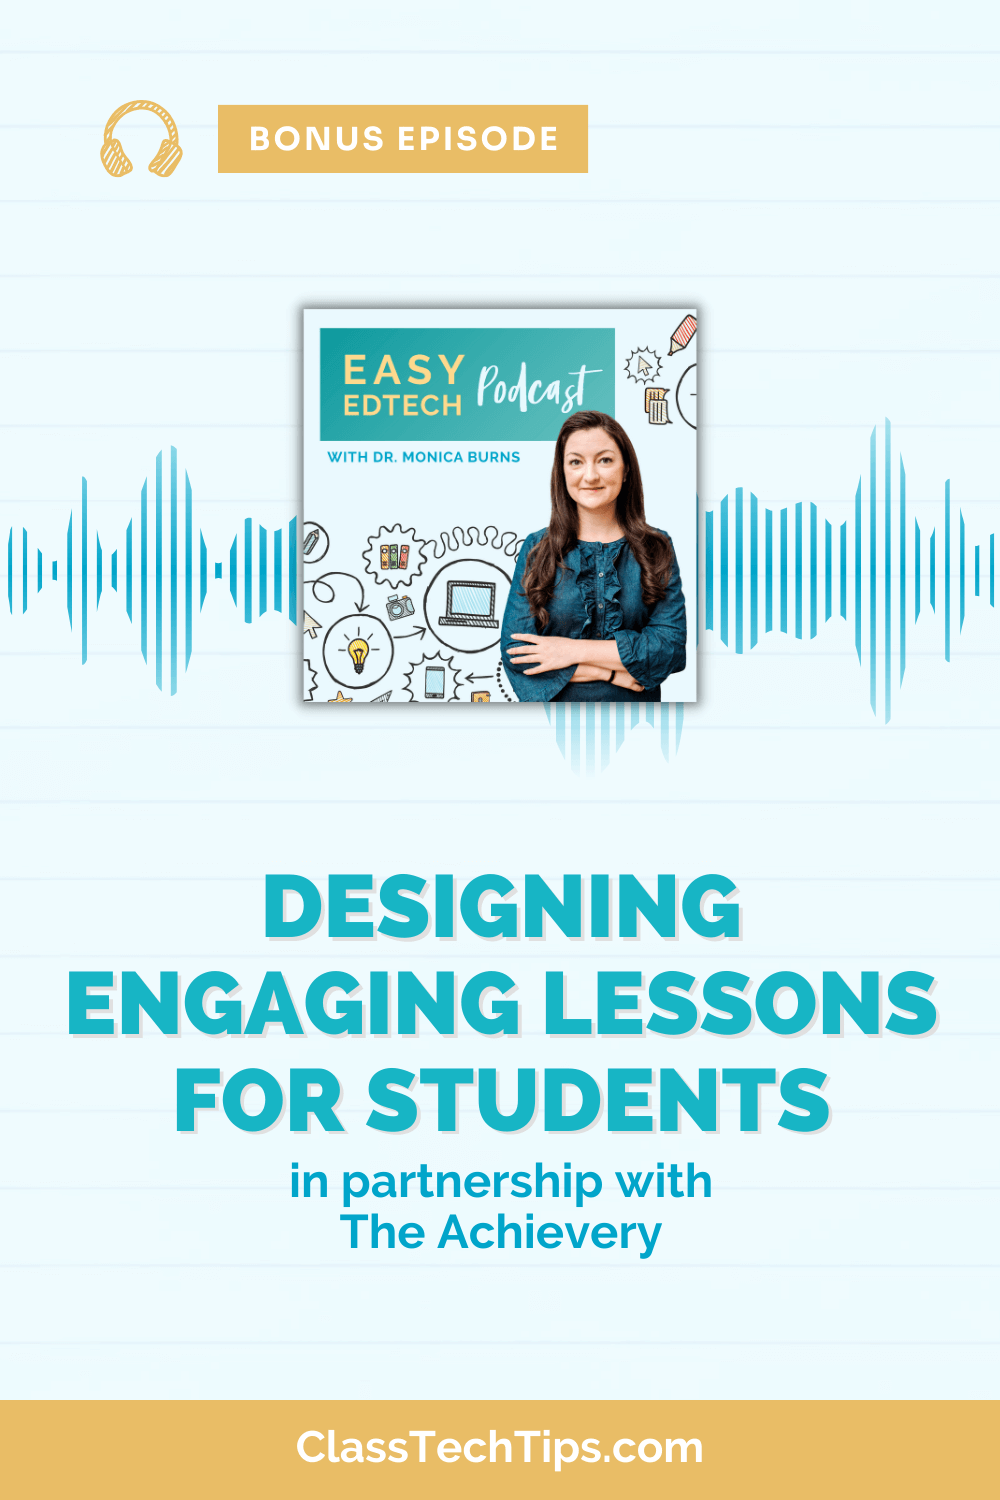 Graphic for the Easy EdTech Podcast bonus episode featuring Dr. Monica Burns, titled "Designing Engaging Lessons for Students," in partnership with The Achievery. The design includes a central image of Dr. Burns with podcast audio waves, educational doodles, and the website ClassTechTips.com.